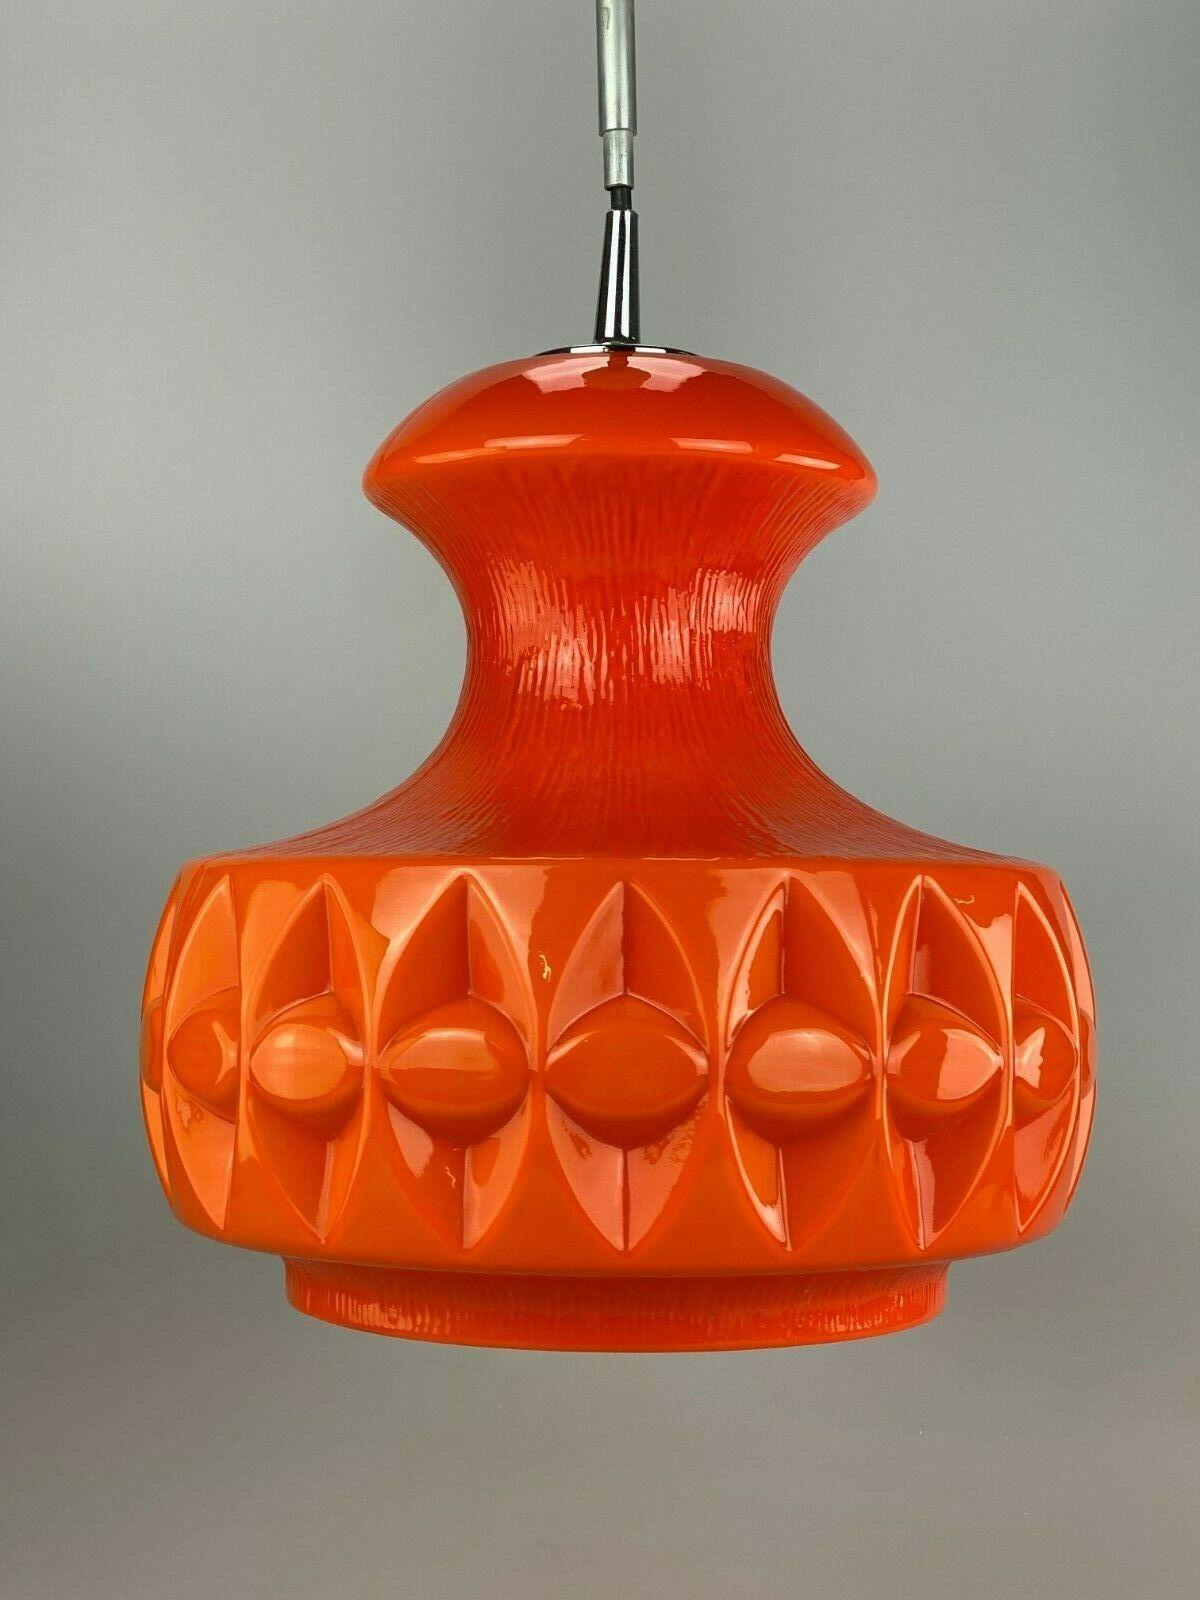 60s 70s Peill & Putzler hanging lamp ceiling lamp glass space design lamp

Object: lamp

Manufacturer: Peill & Putzler

Condition: good

Age: around 1960-1970

Dimensions:

Diameter = 30cm
Height = 50cm

Other notes:

The pictures